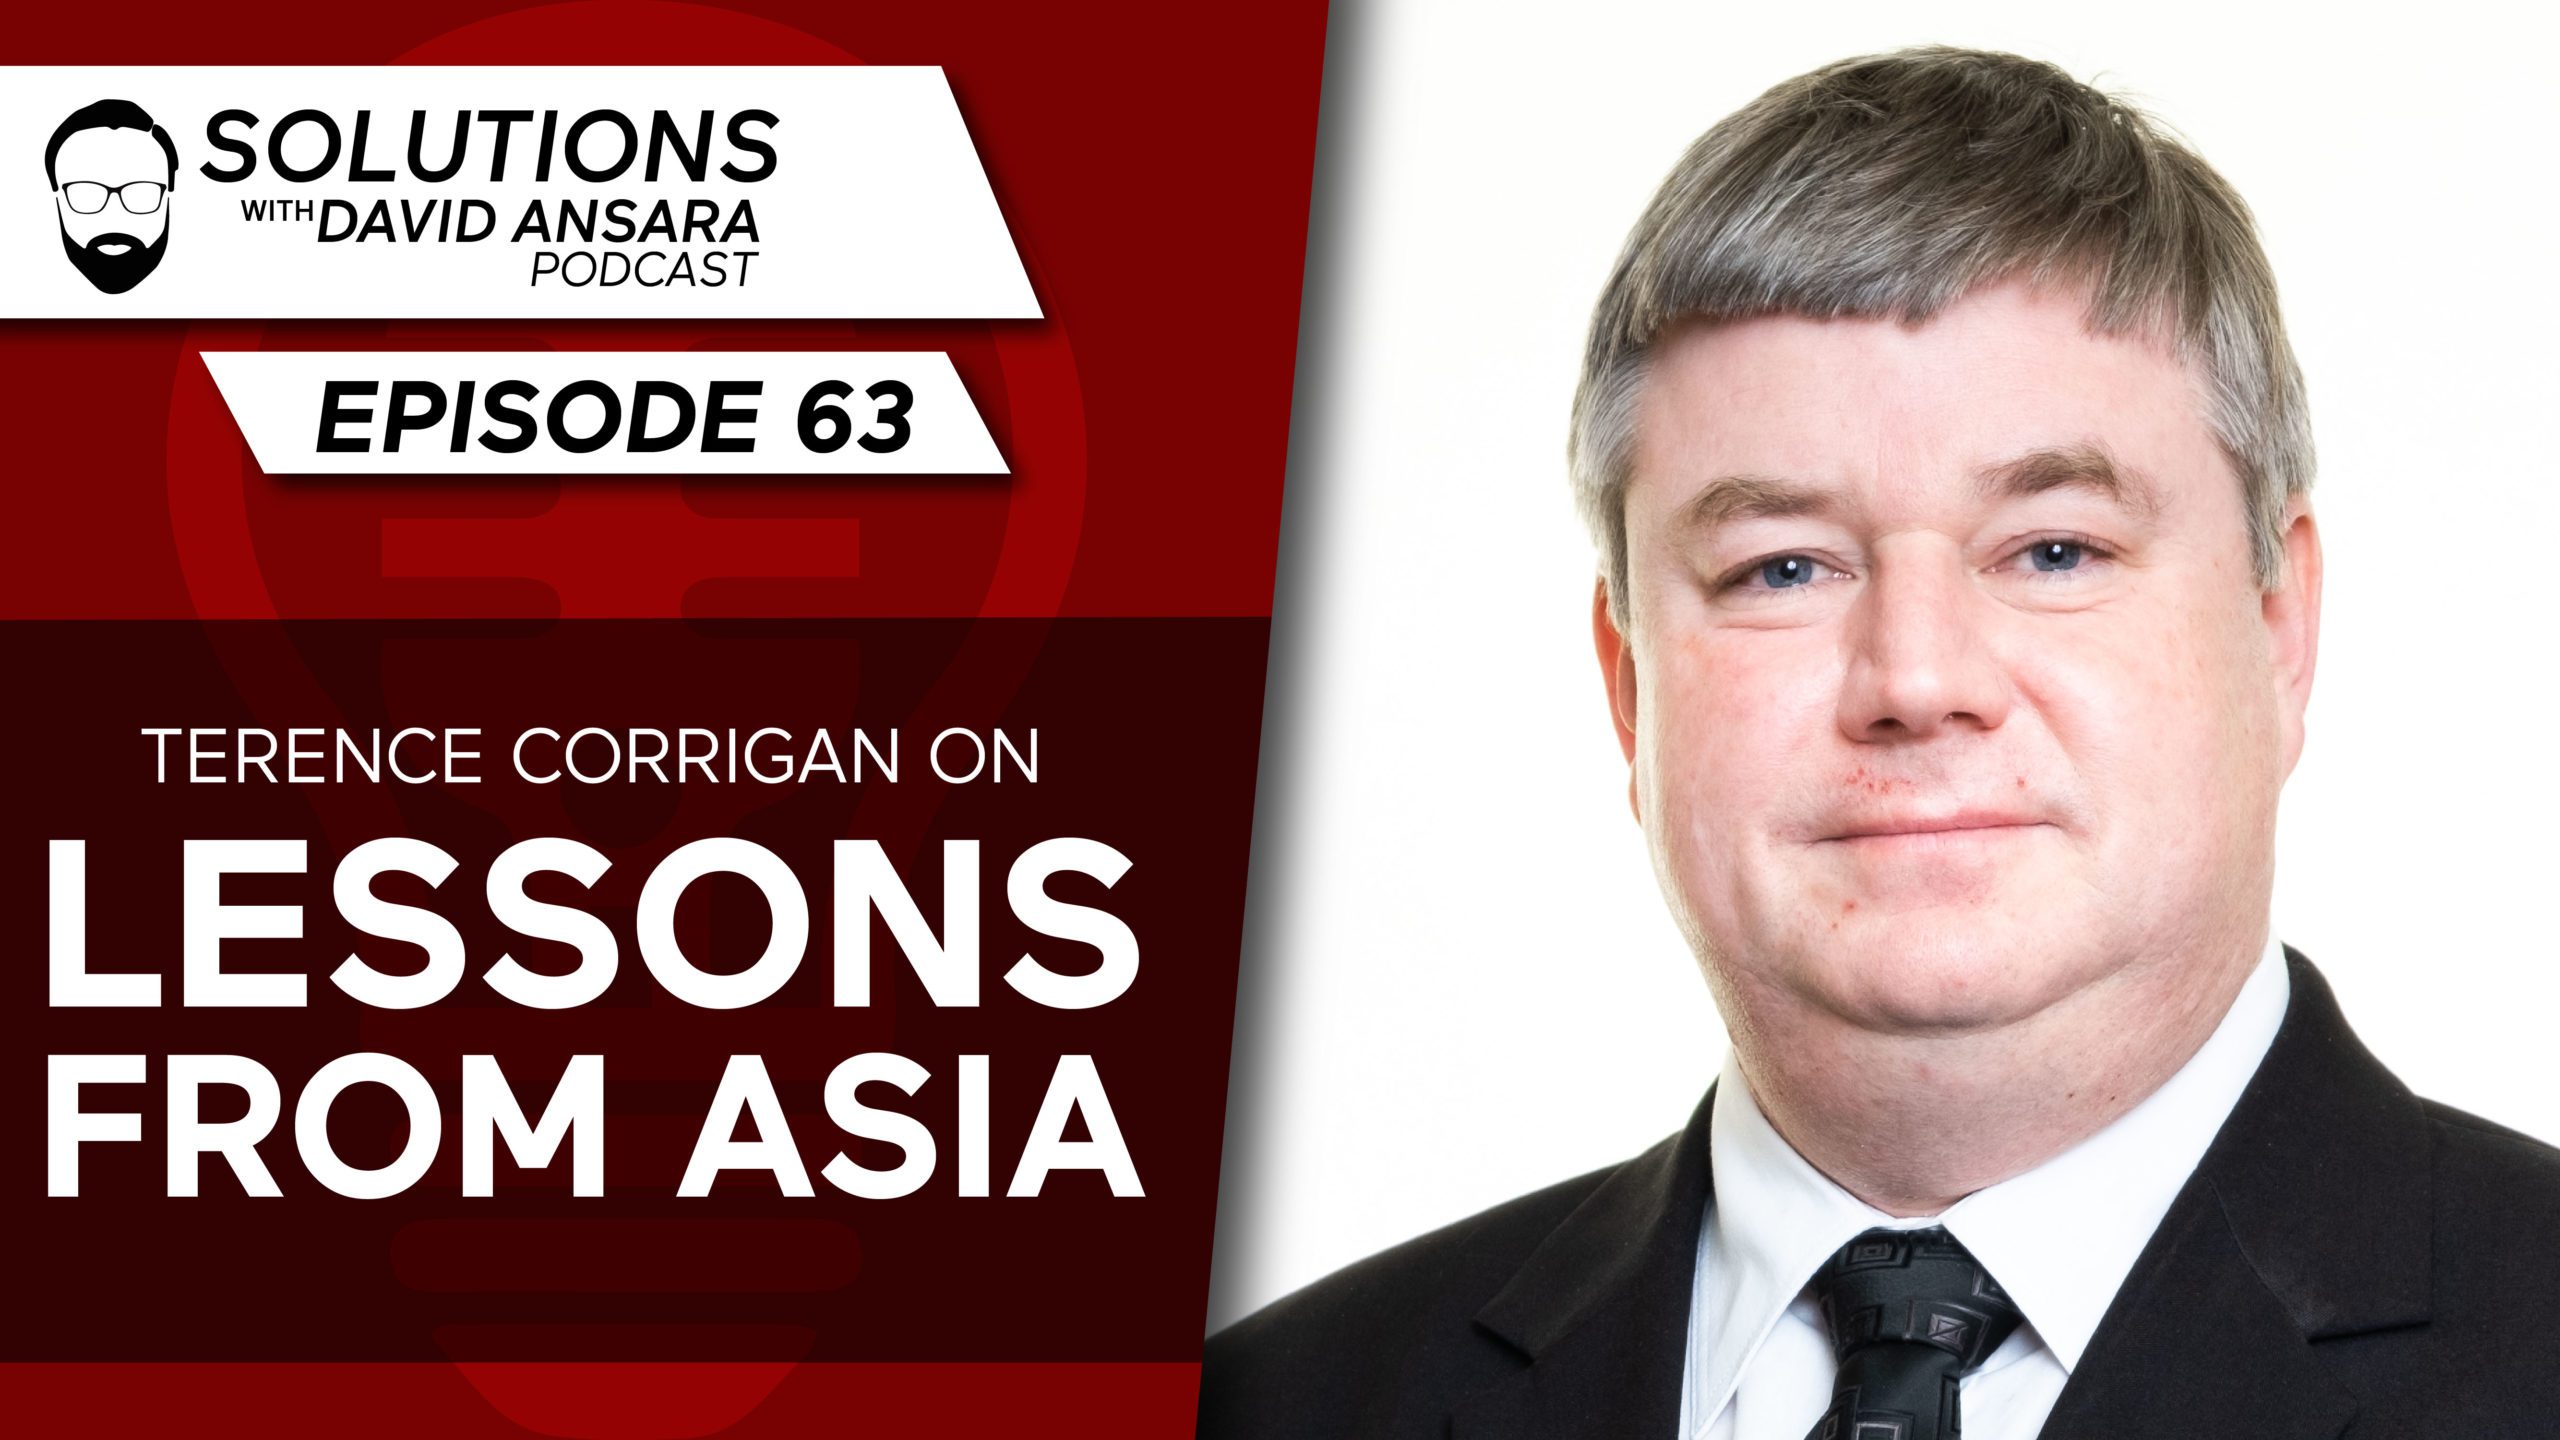 terence-corrigan-on-lessons-from-asia-|-solutions-with-david-ansara-podcast-#63